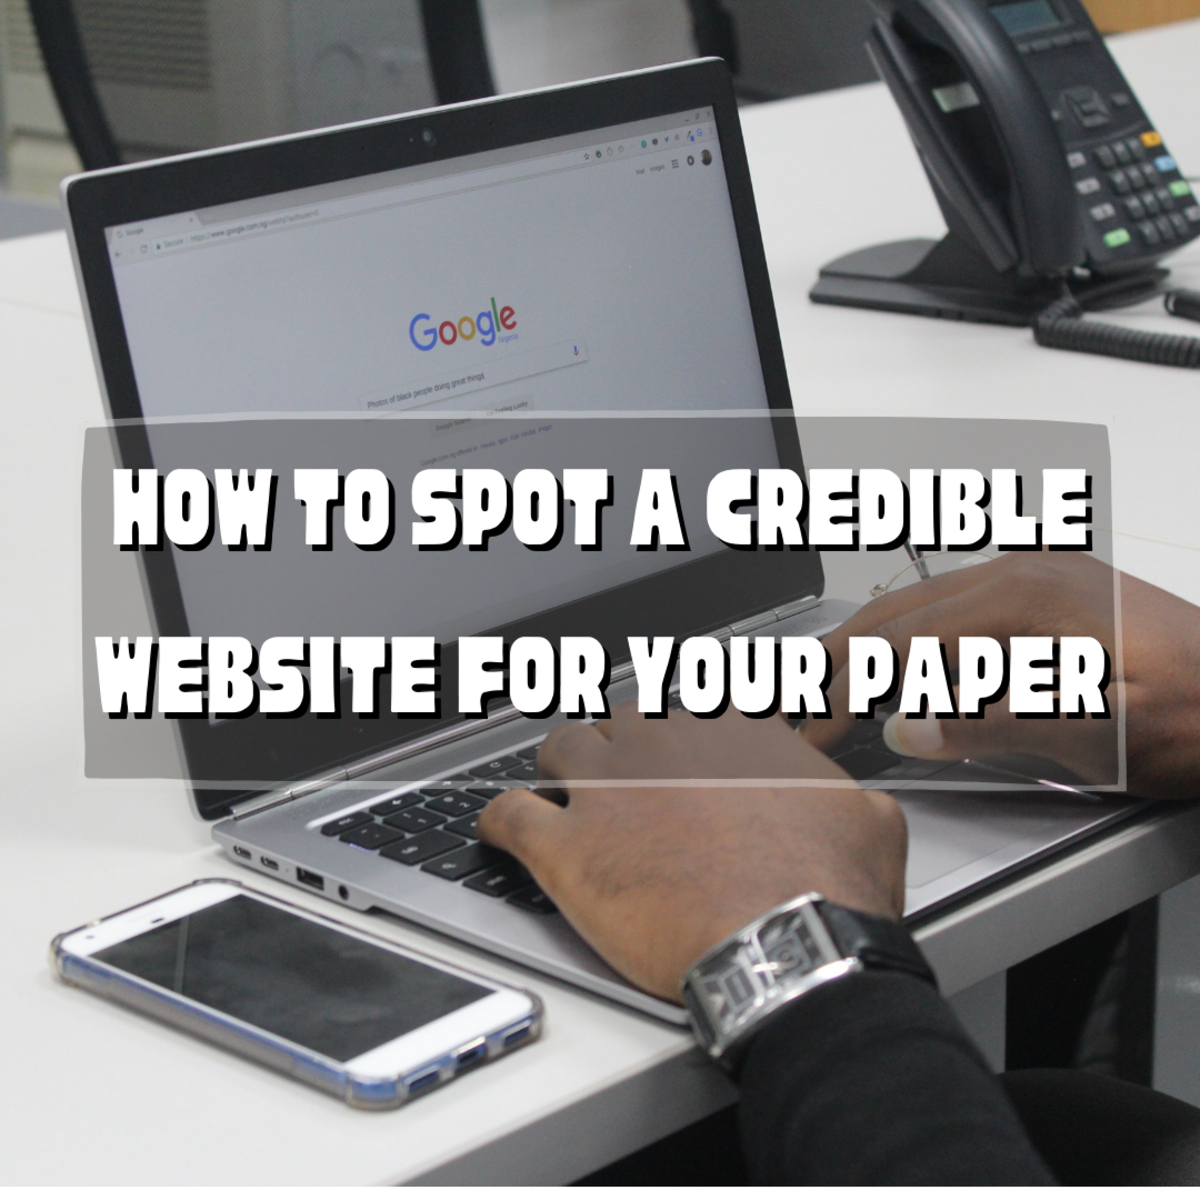 How to Spot a Credible Website for Your Paper